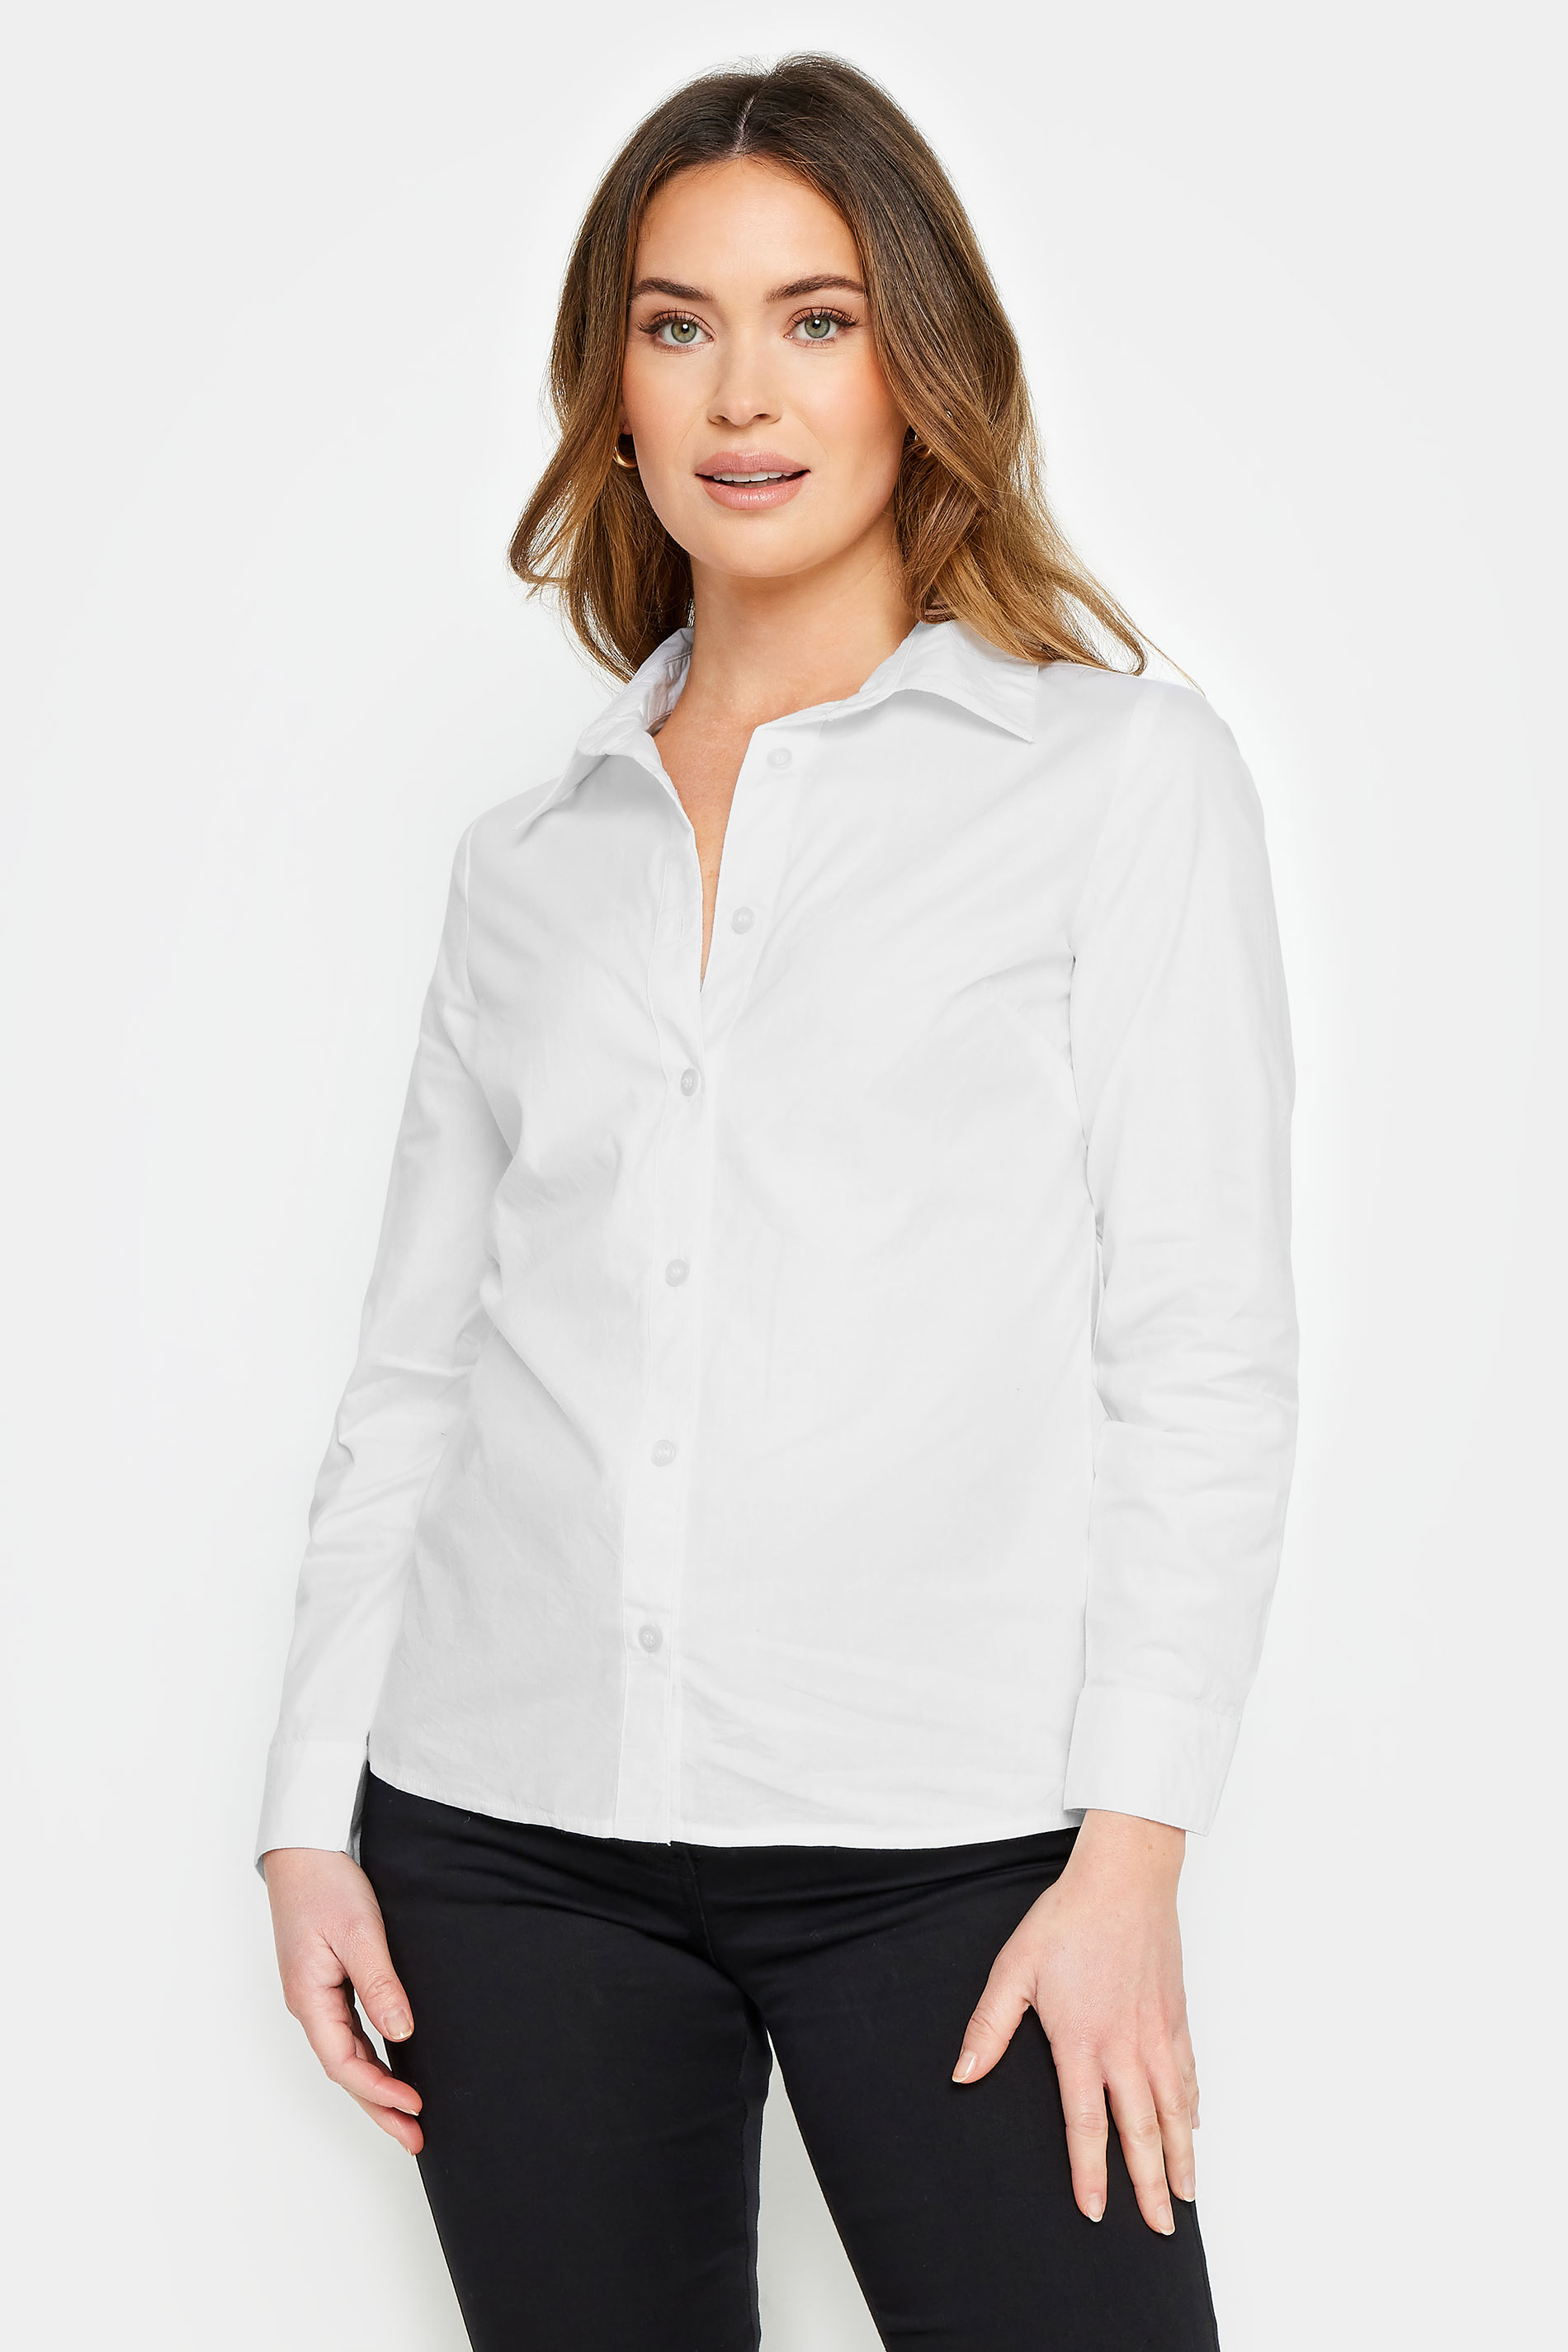 M&Co Petite White Fitted Cotton Poplin Shirt | M&Co 1